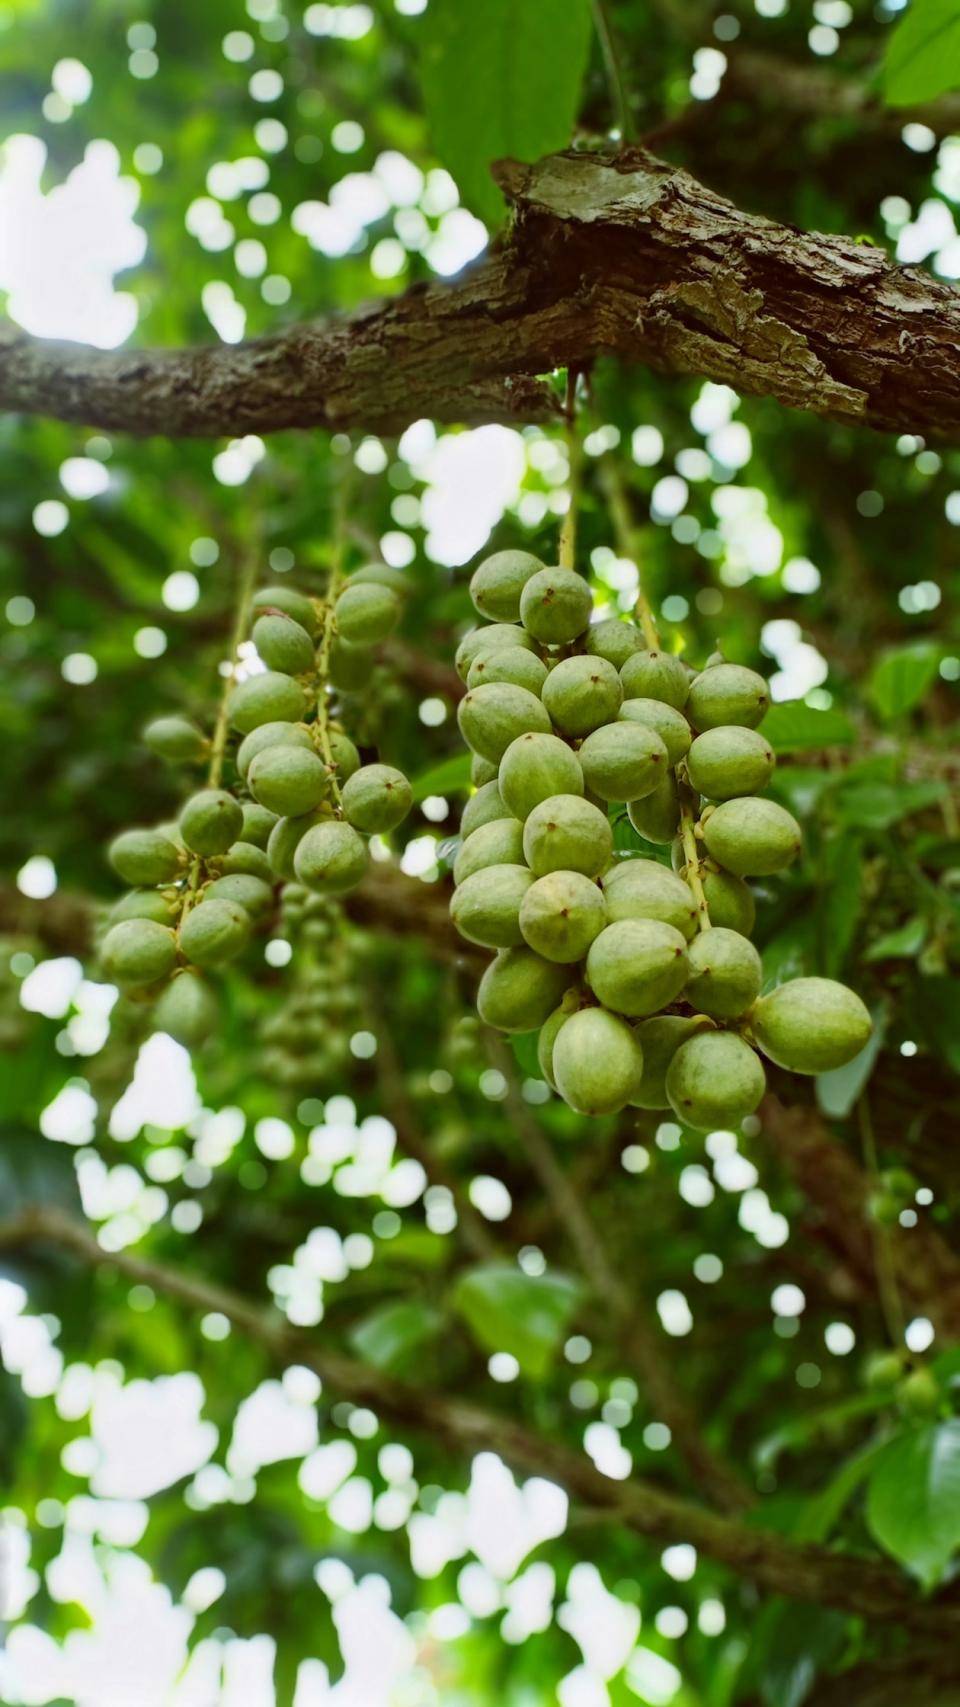 Round, green shea butter fruits hanging from a tree